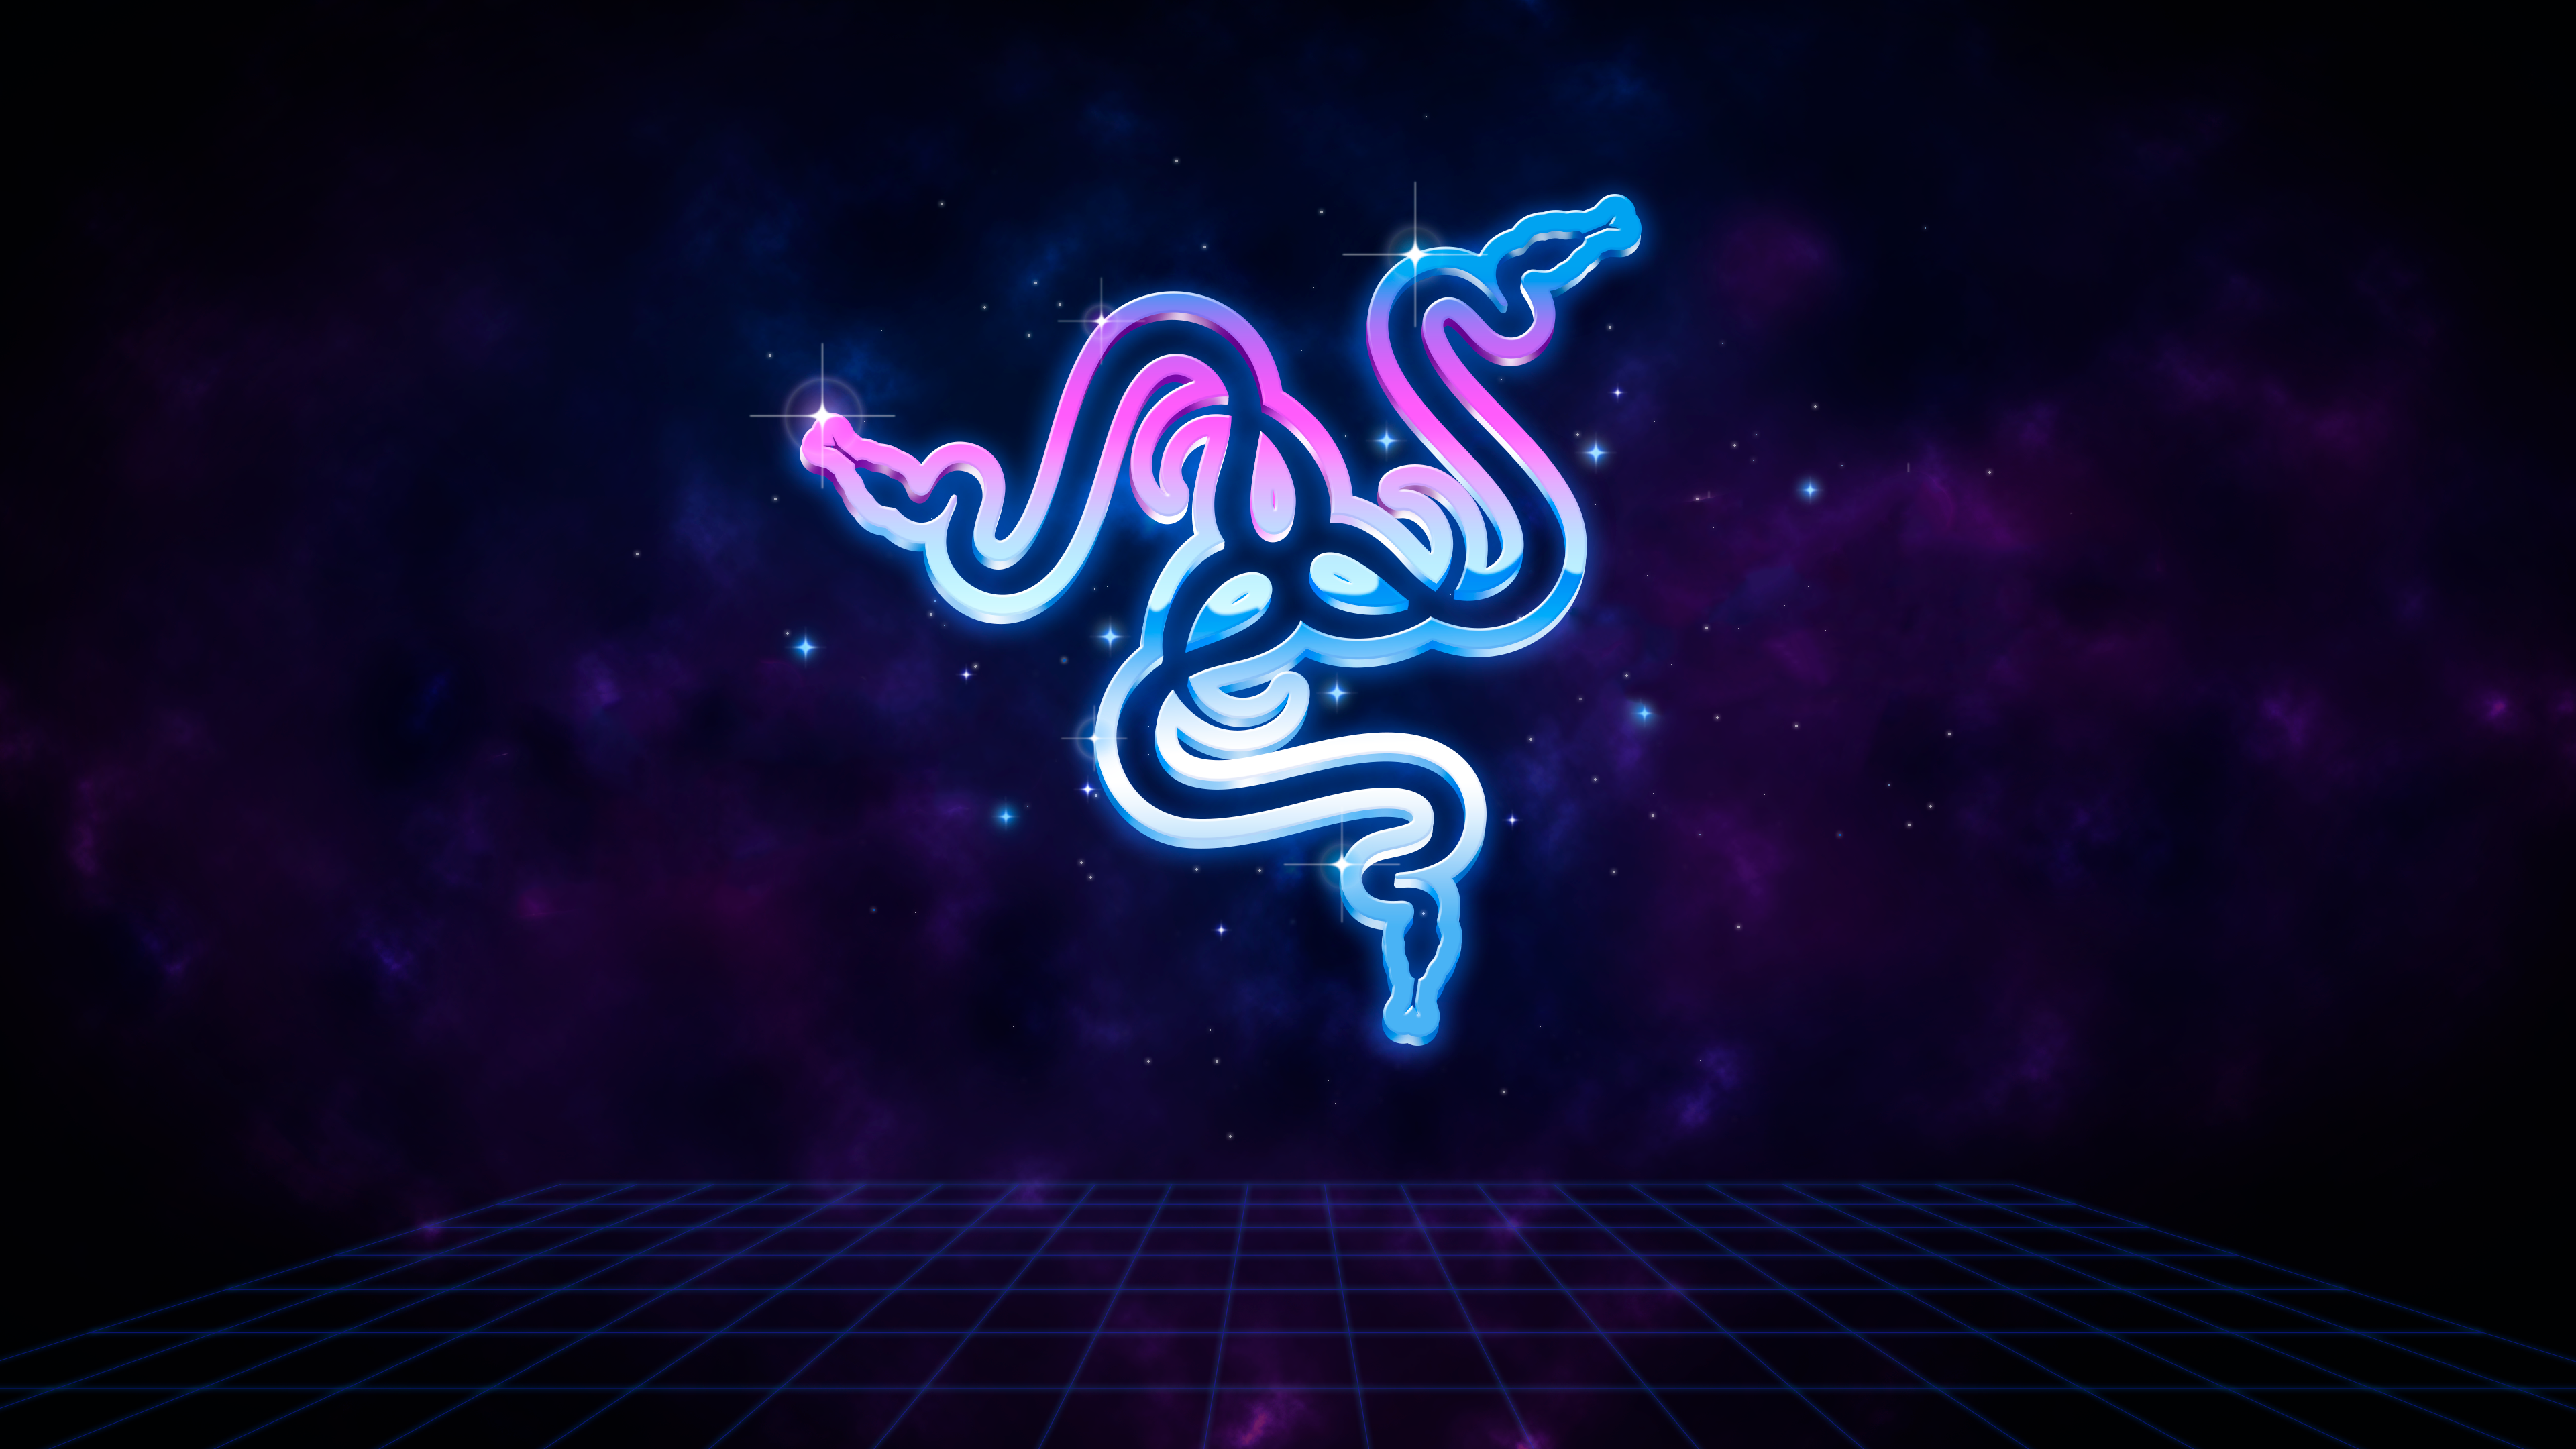 I removed the text from the Vice City wallpaper: razer